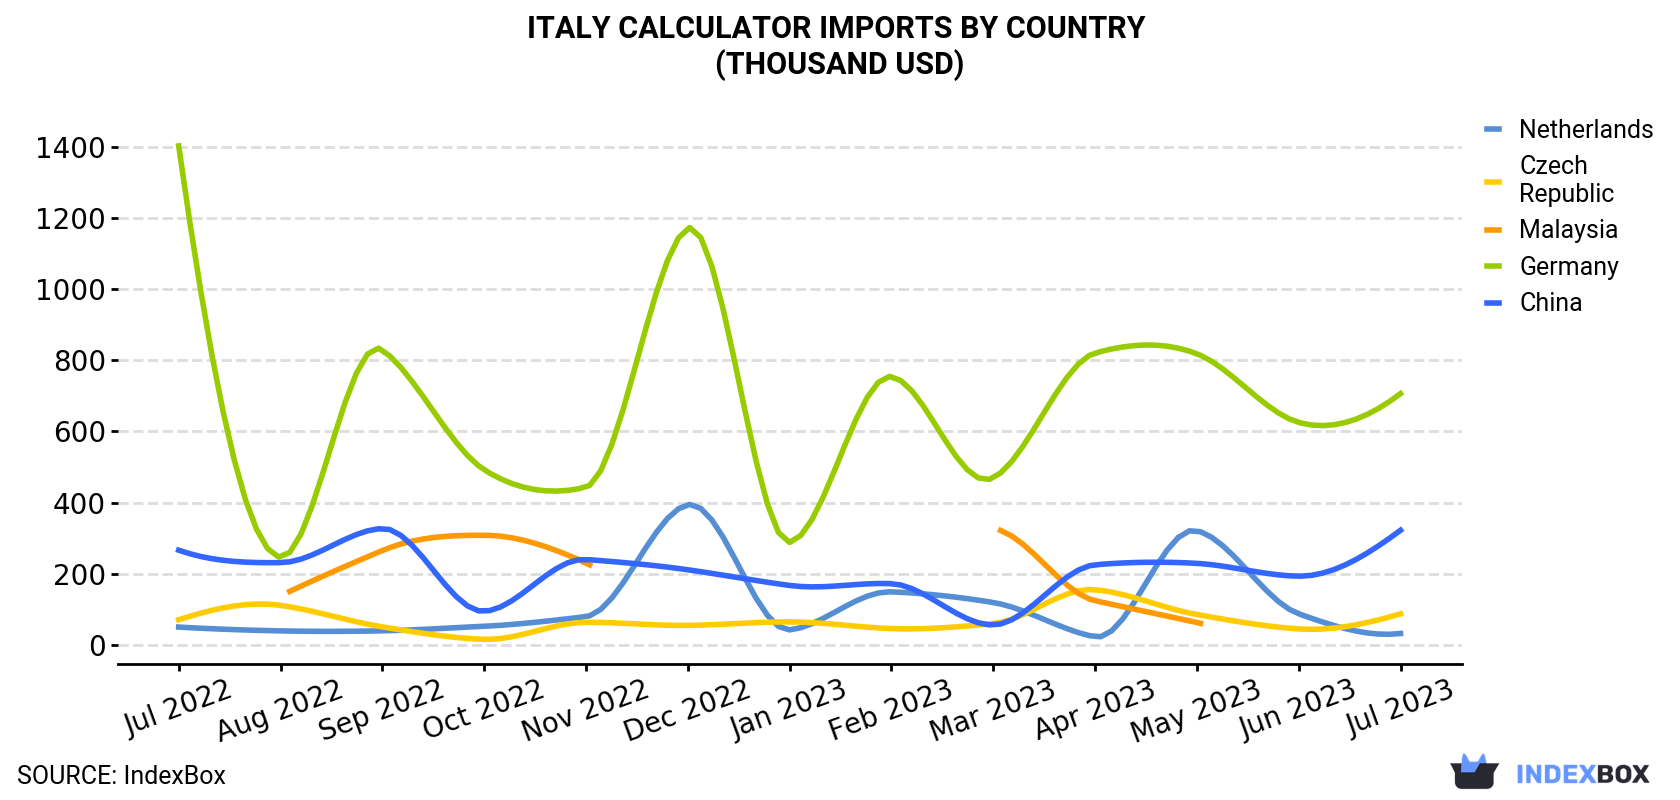 Italy Calculator Imports By Country (Thousand USD)